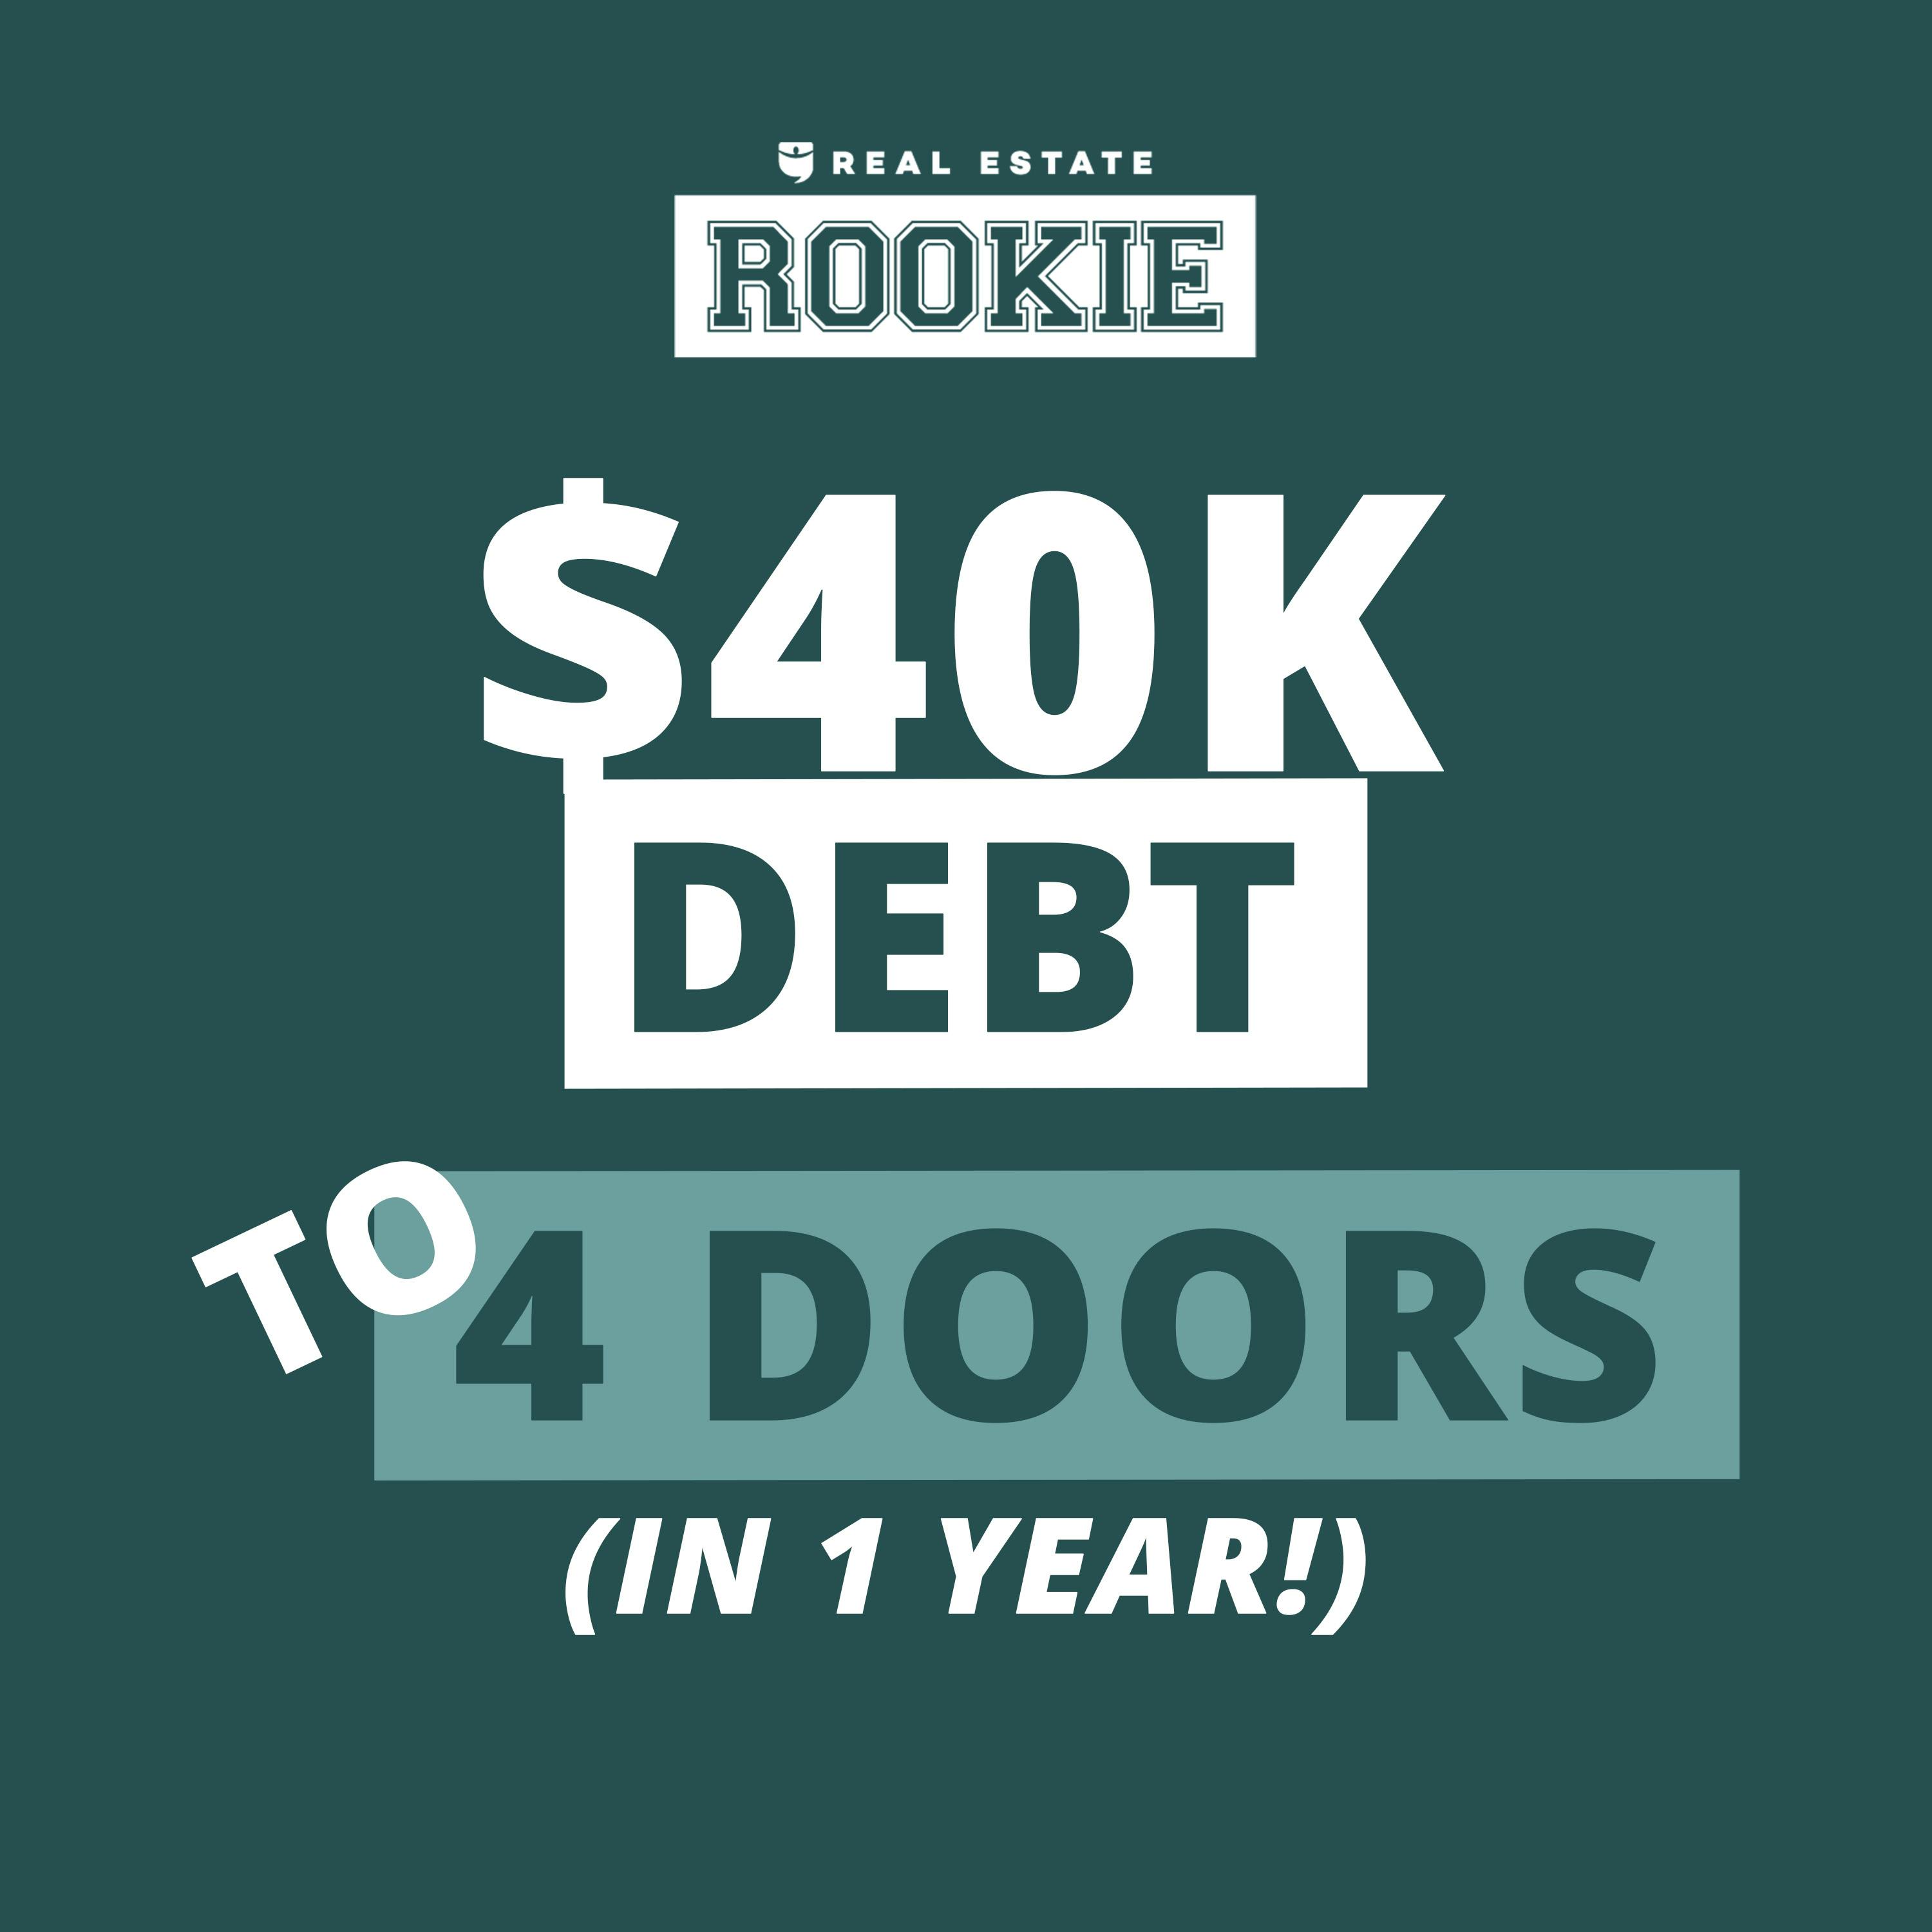 275: From $40K Debt to 4 Doors and Six-Figure Net Worth (In 1 Year!)